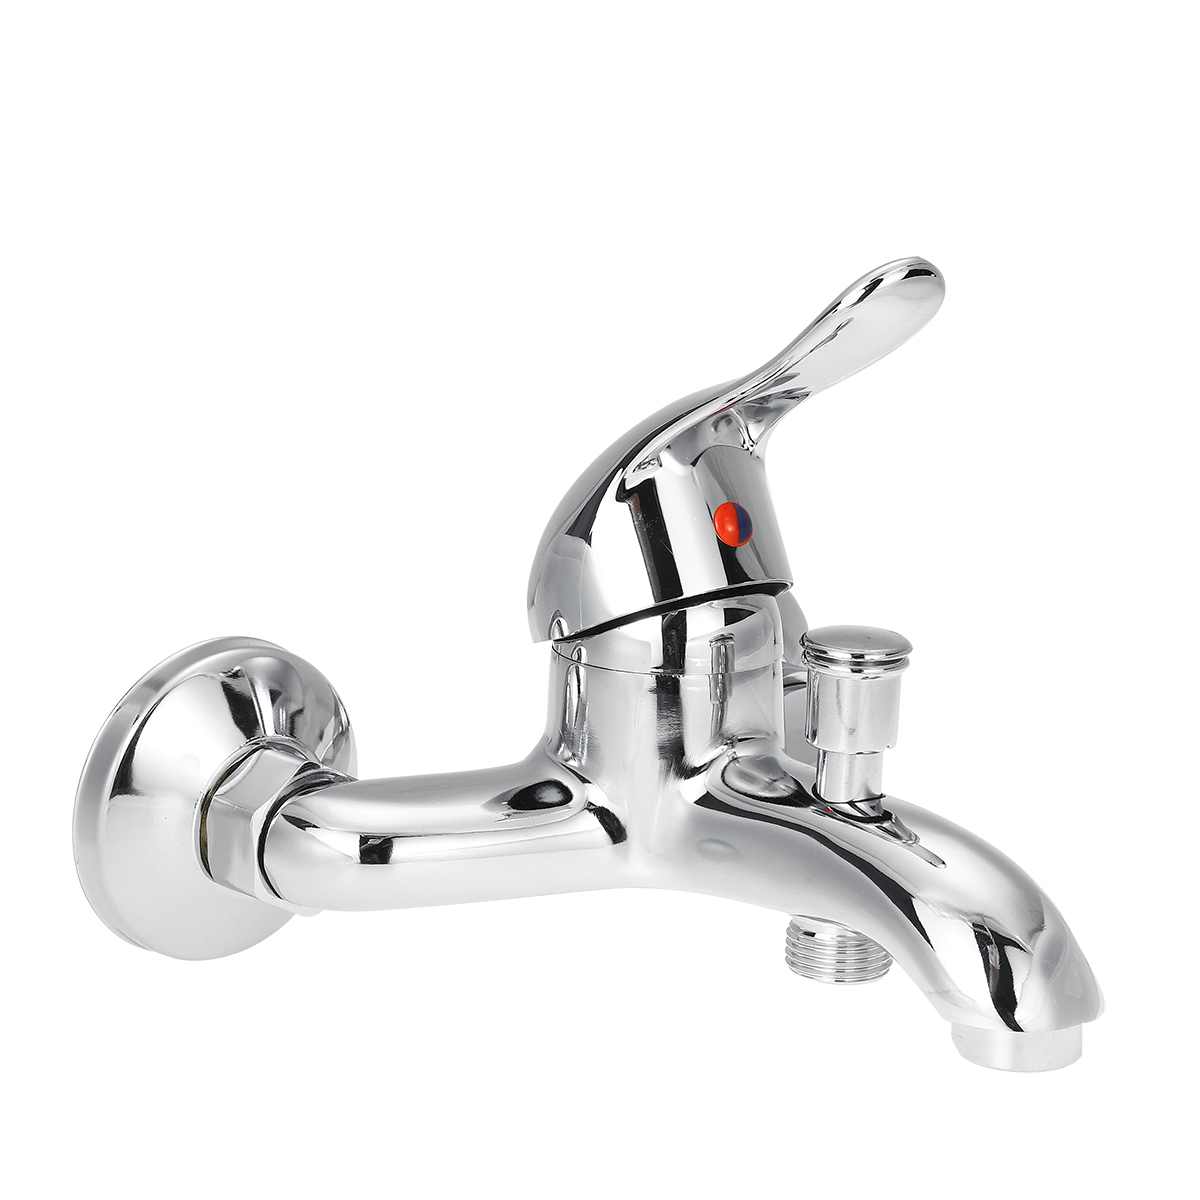 Triplet Faucet Wall Mounted Bathroom Bath Shower Basin Tap Water Mixer Stainless Steel